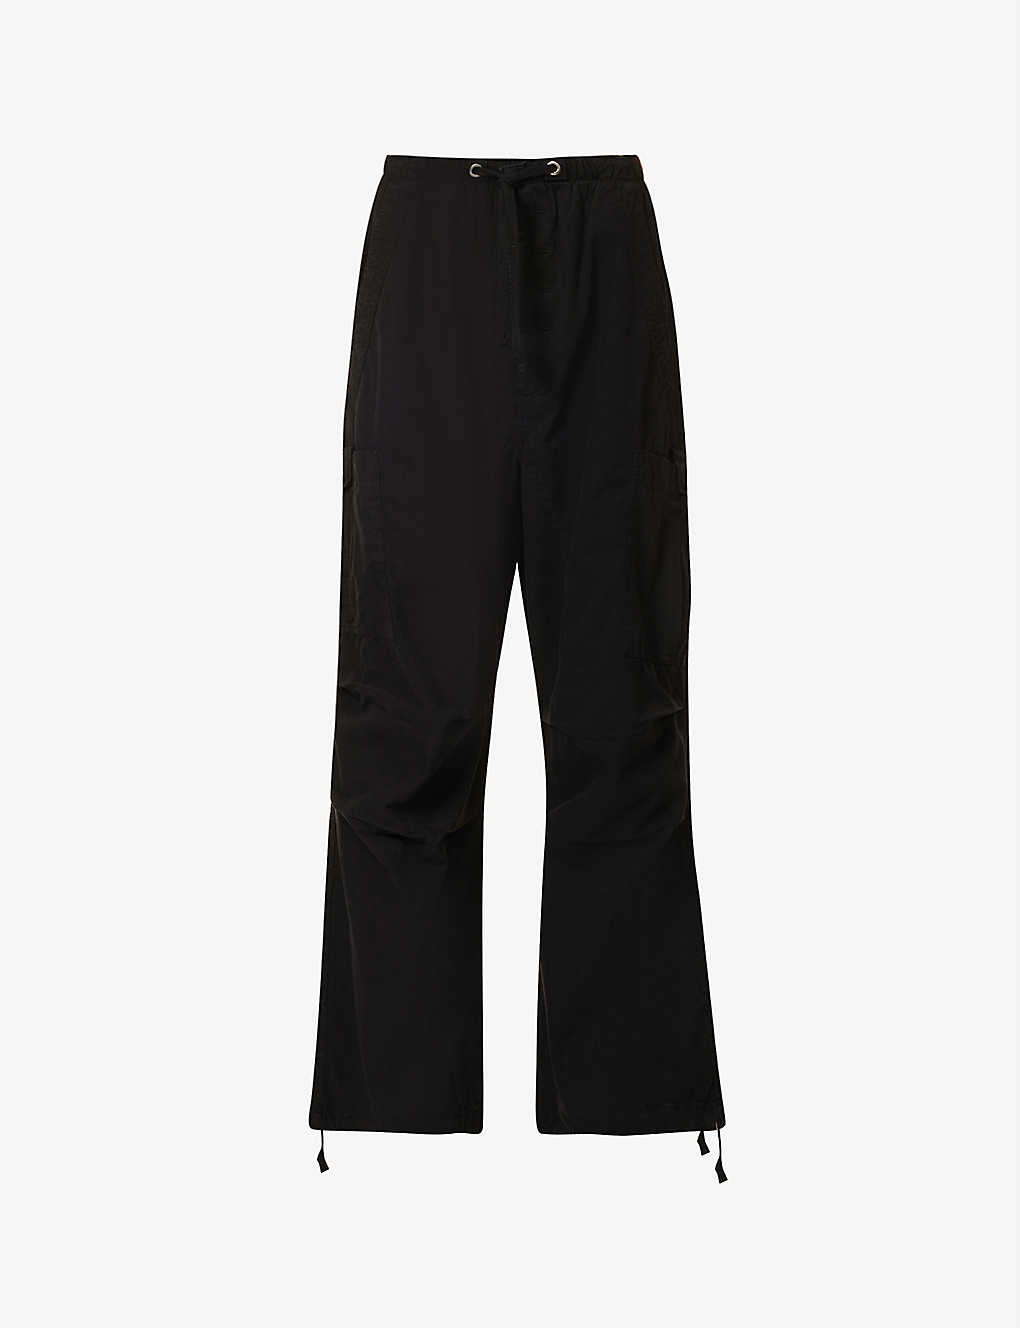 Jaded London Womens Black Parachute Relaxed-fit Wide-leg High-rise Cotton Trousers